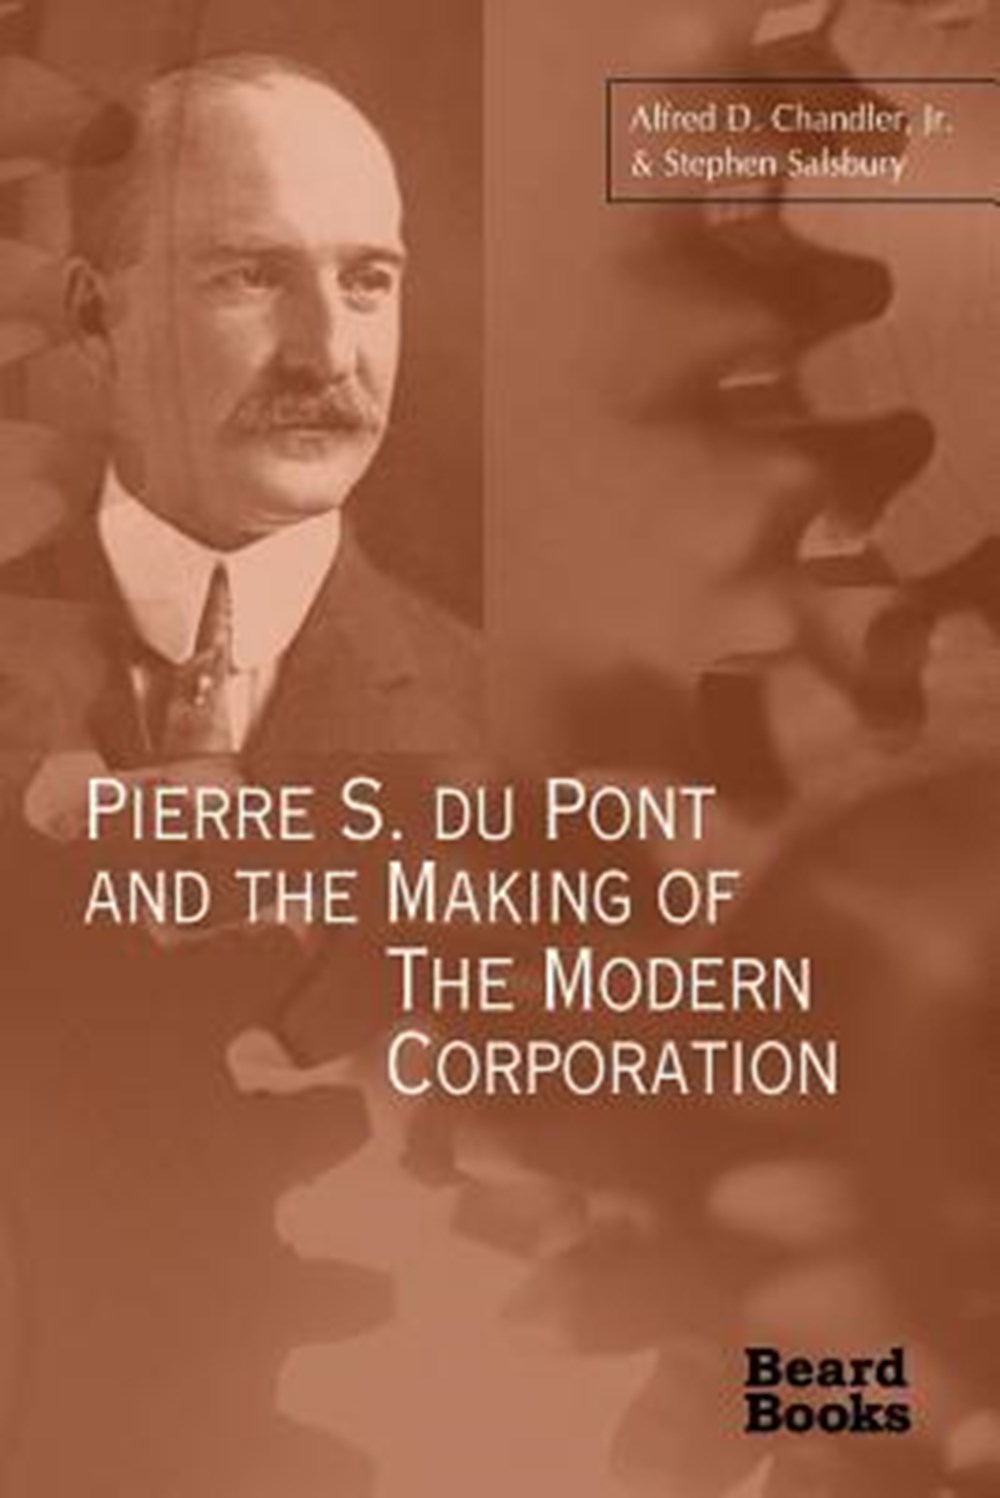 Pierre S. Du Pont and the Making of the Modern Corporation